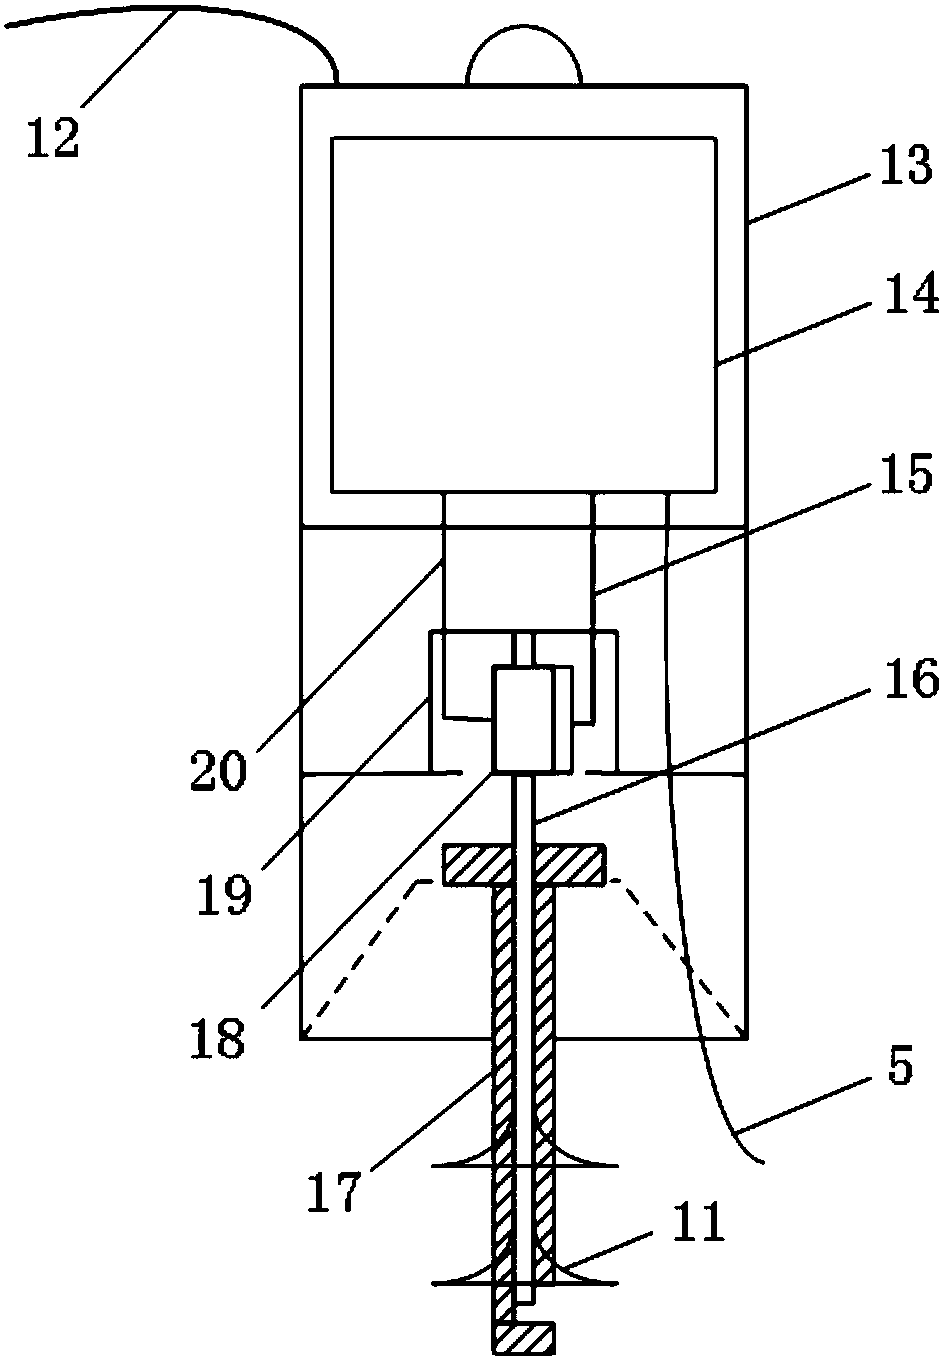 High-potential current acquisition system with rain-proof function